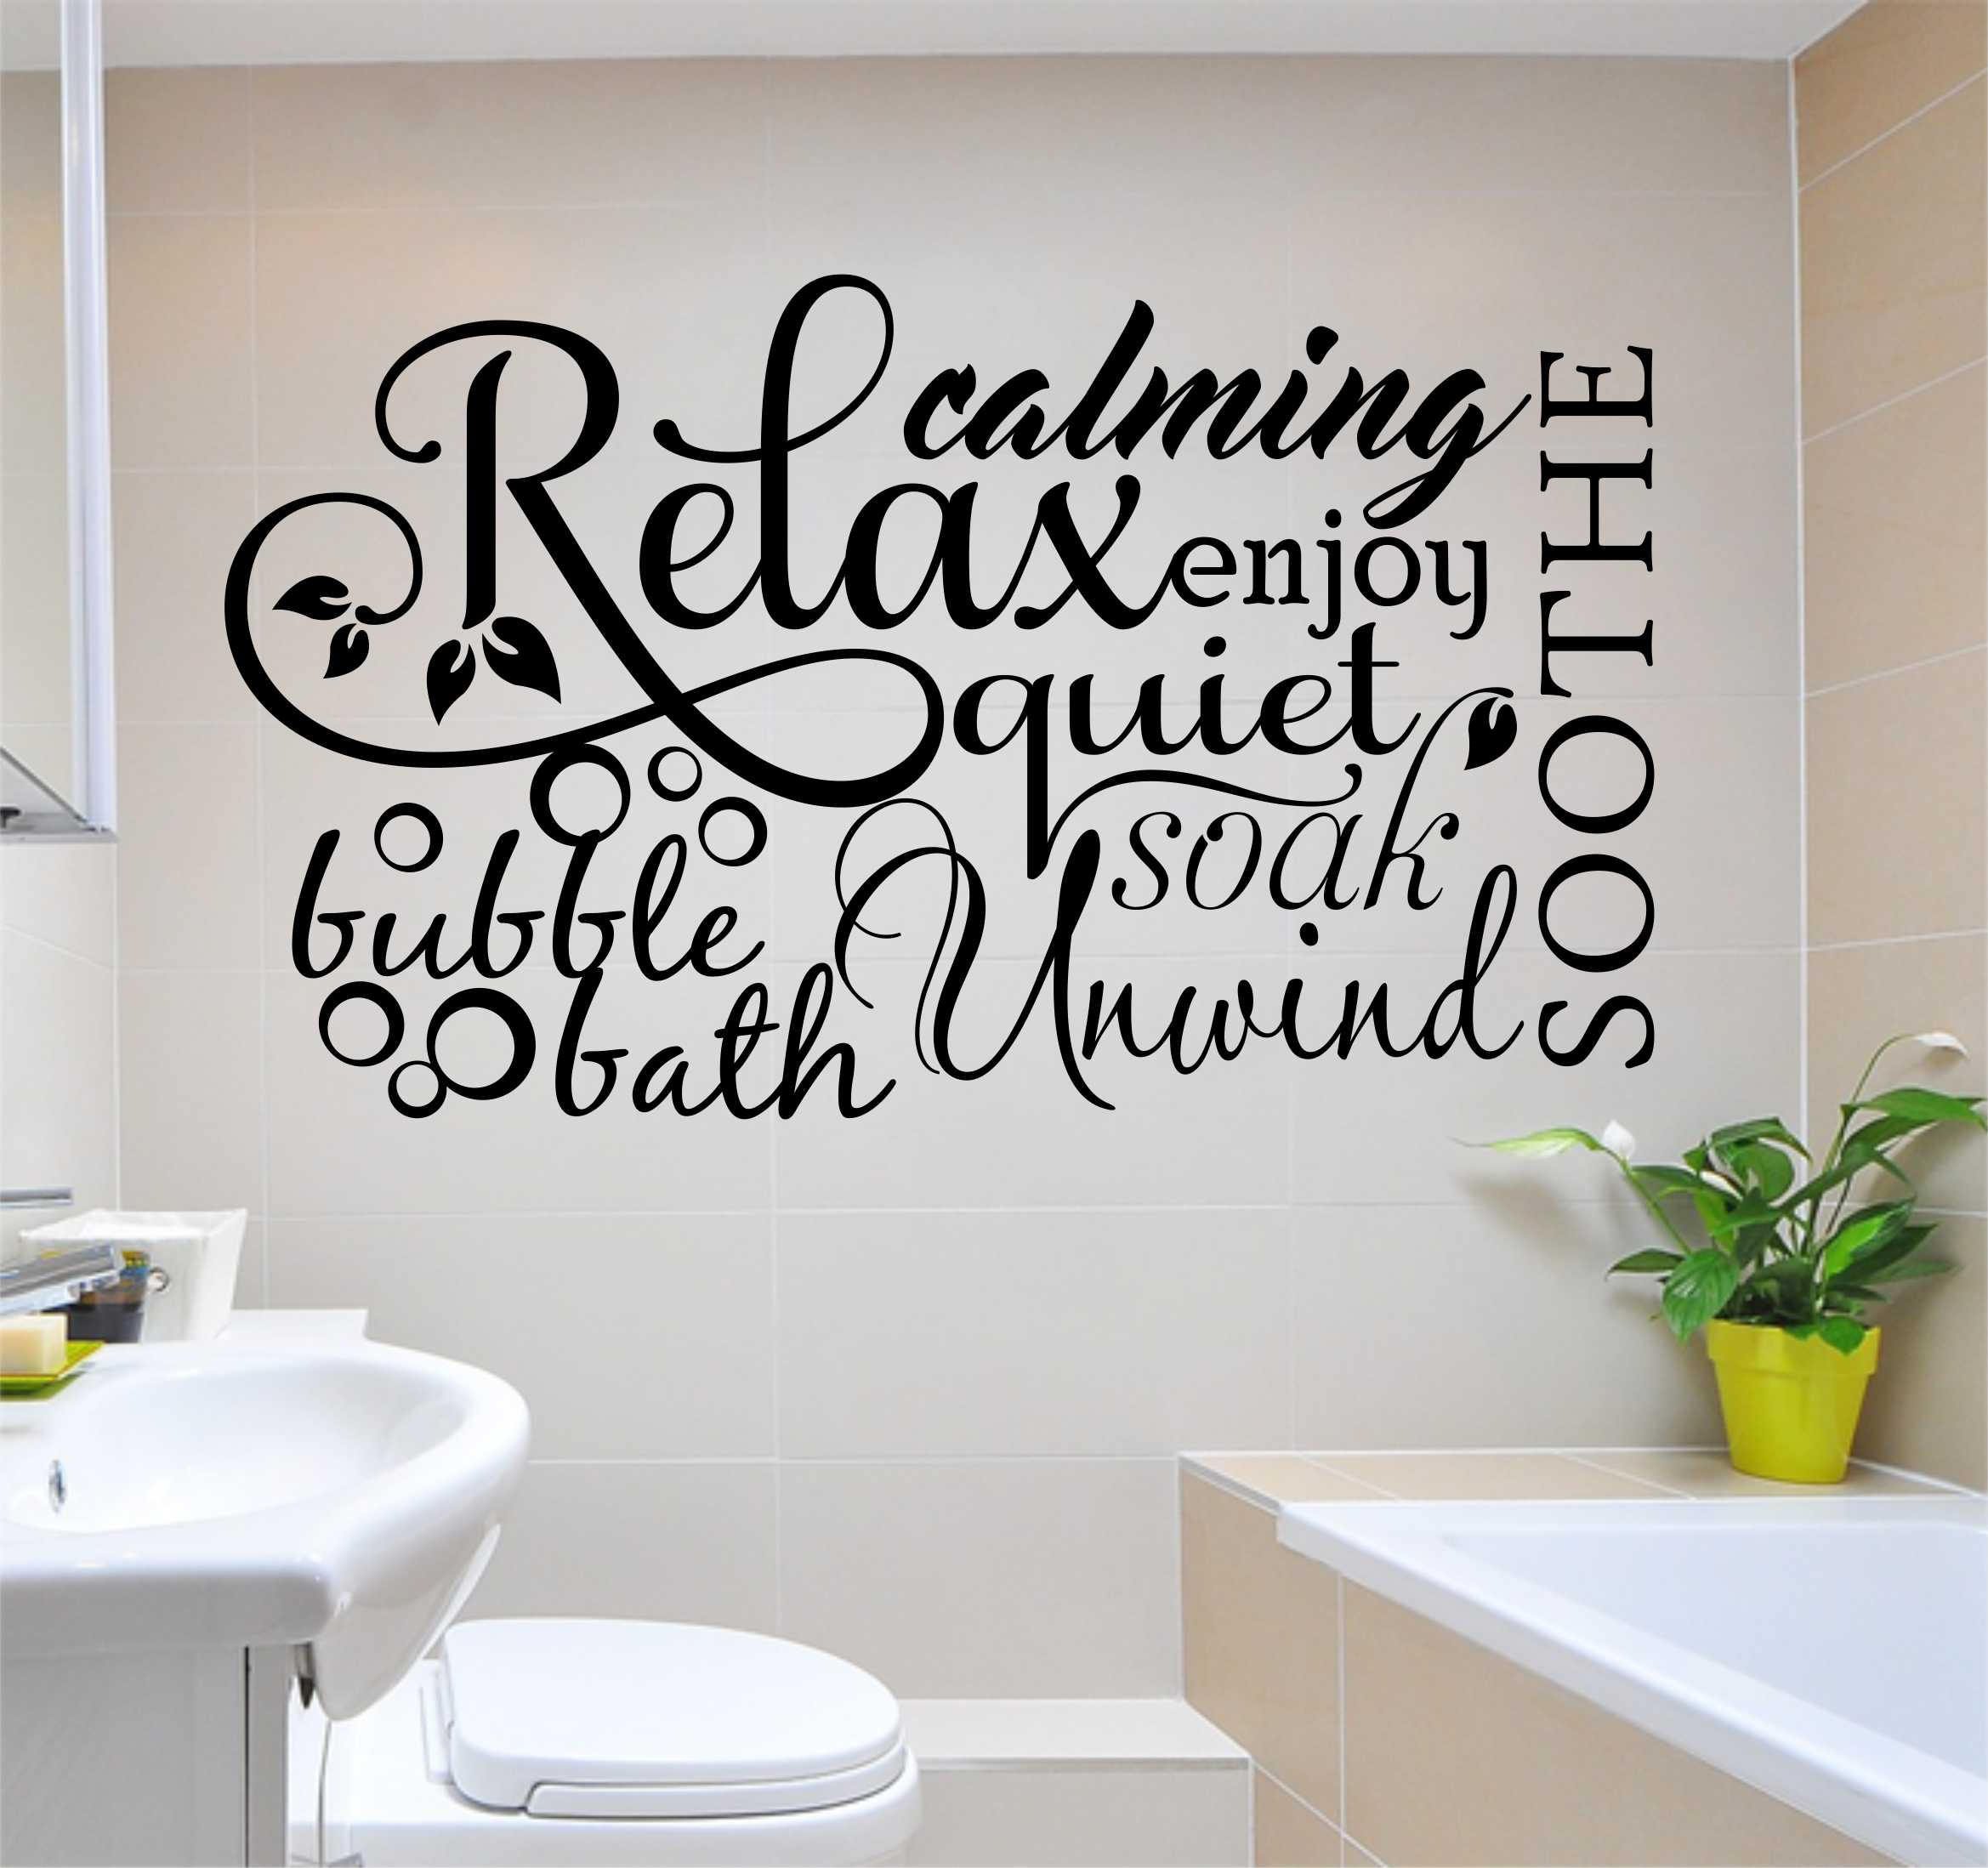 GET NAKED BATHROOM WALL STICKER VINYL ART DECAL BUBBLE SHOWER QUOTES w99 